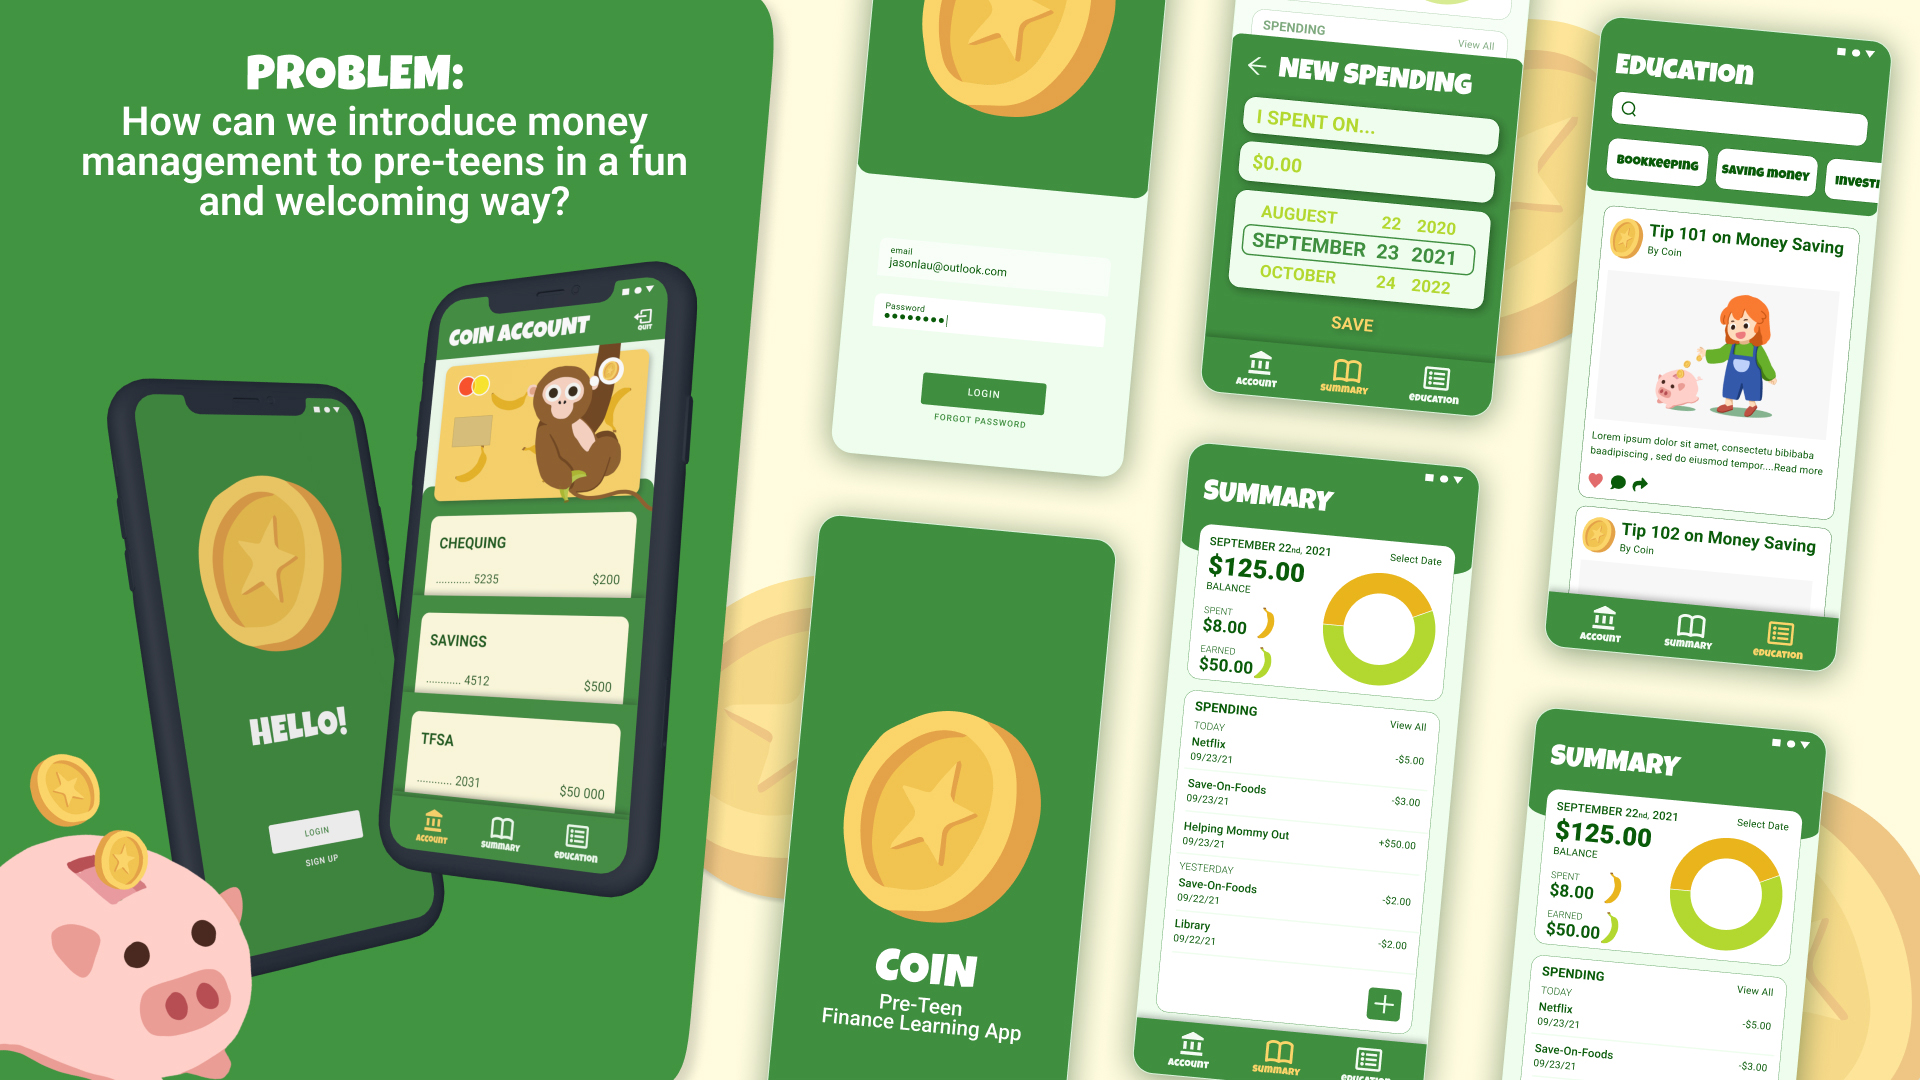 On the left is an iPhone mock-up showing the launch screen of the Coin app with a problem statement at the top. On the right are six screens from Coin organized in a grid formation.